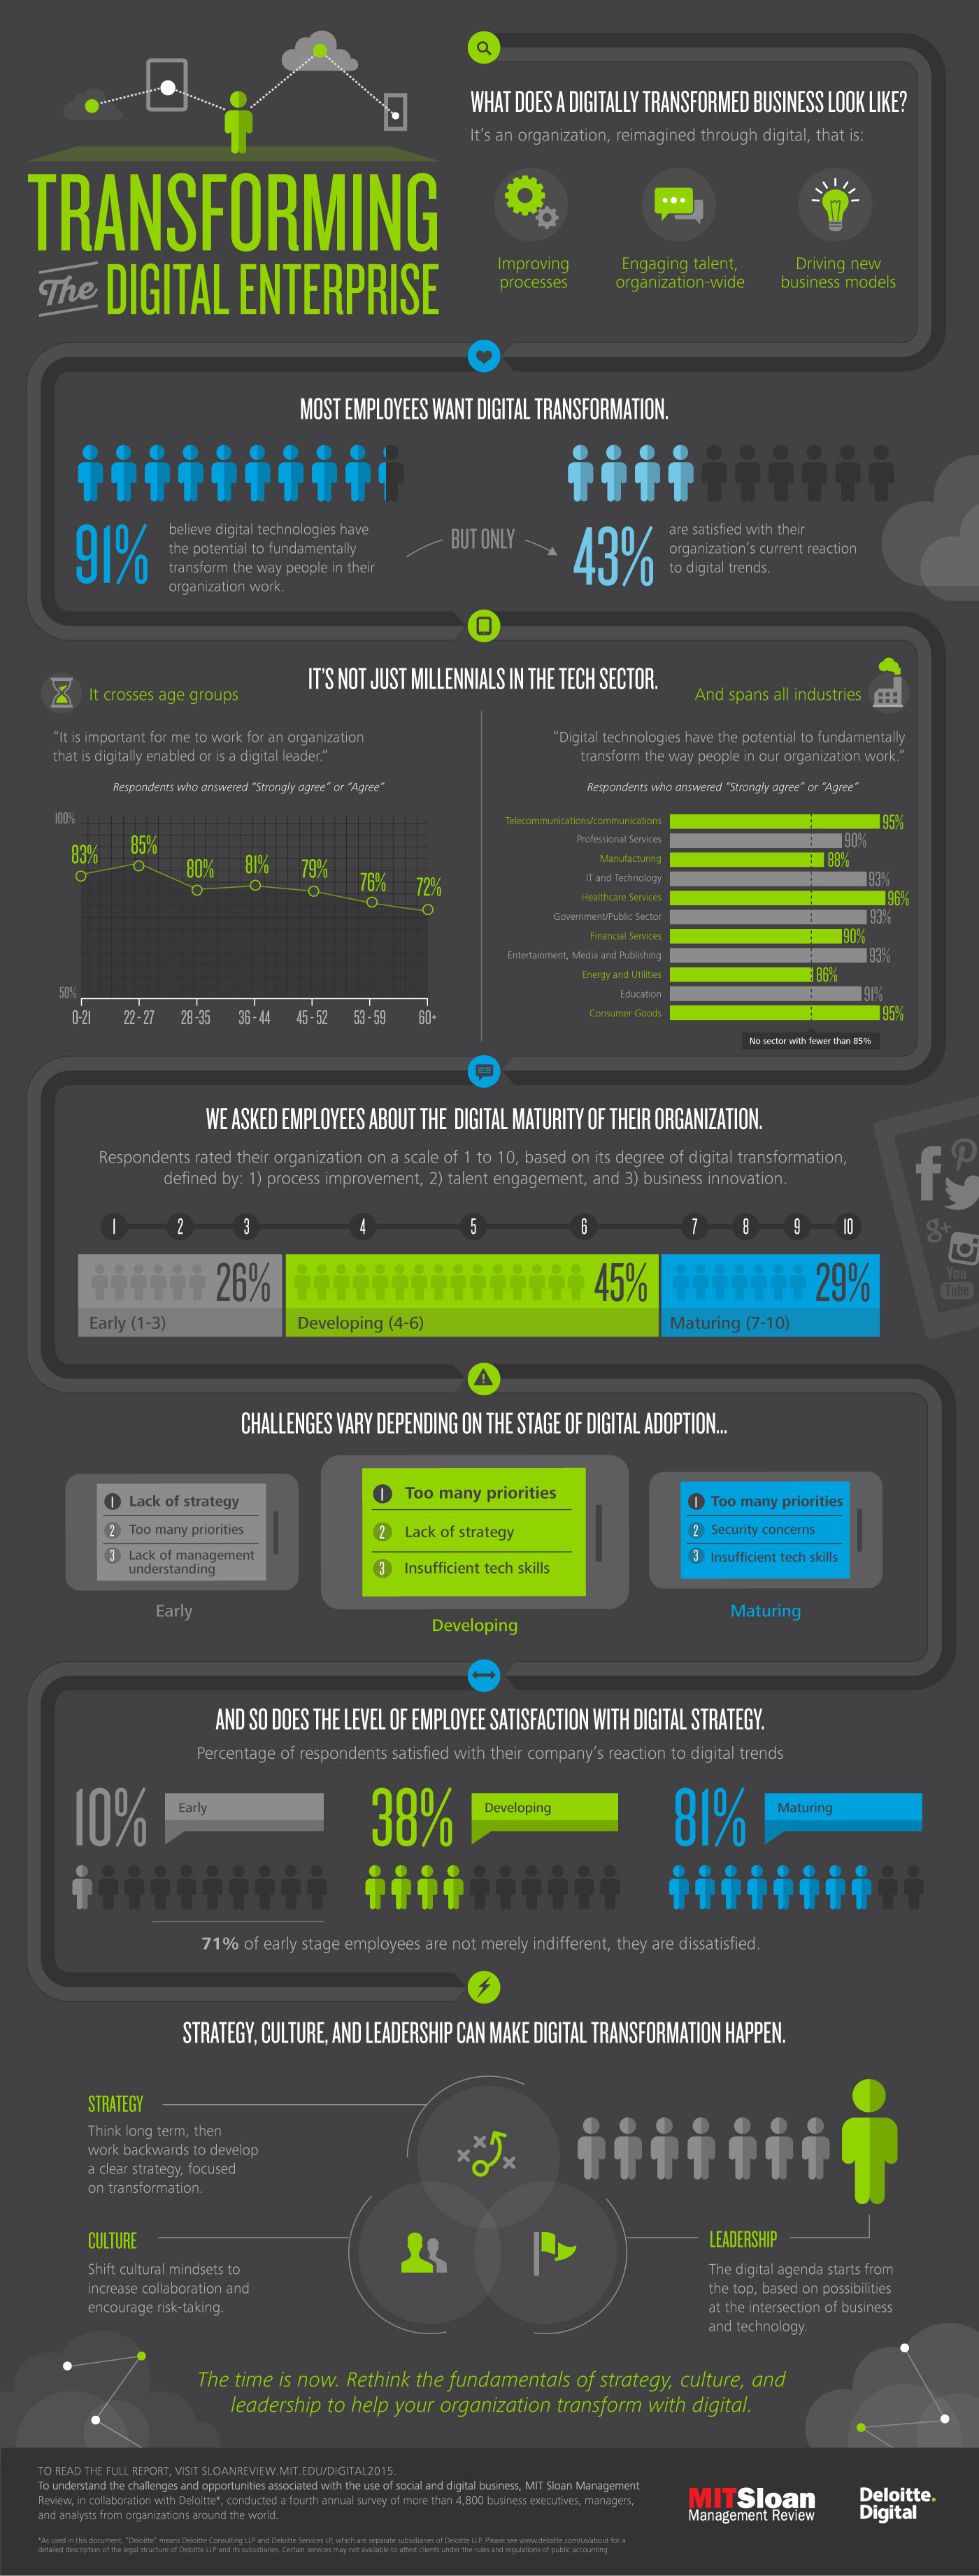 2015 Digital Business Report Infographic